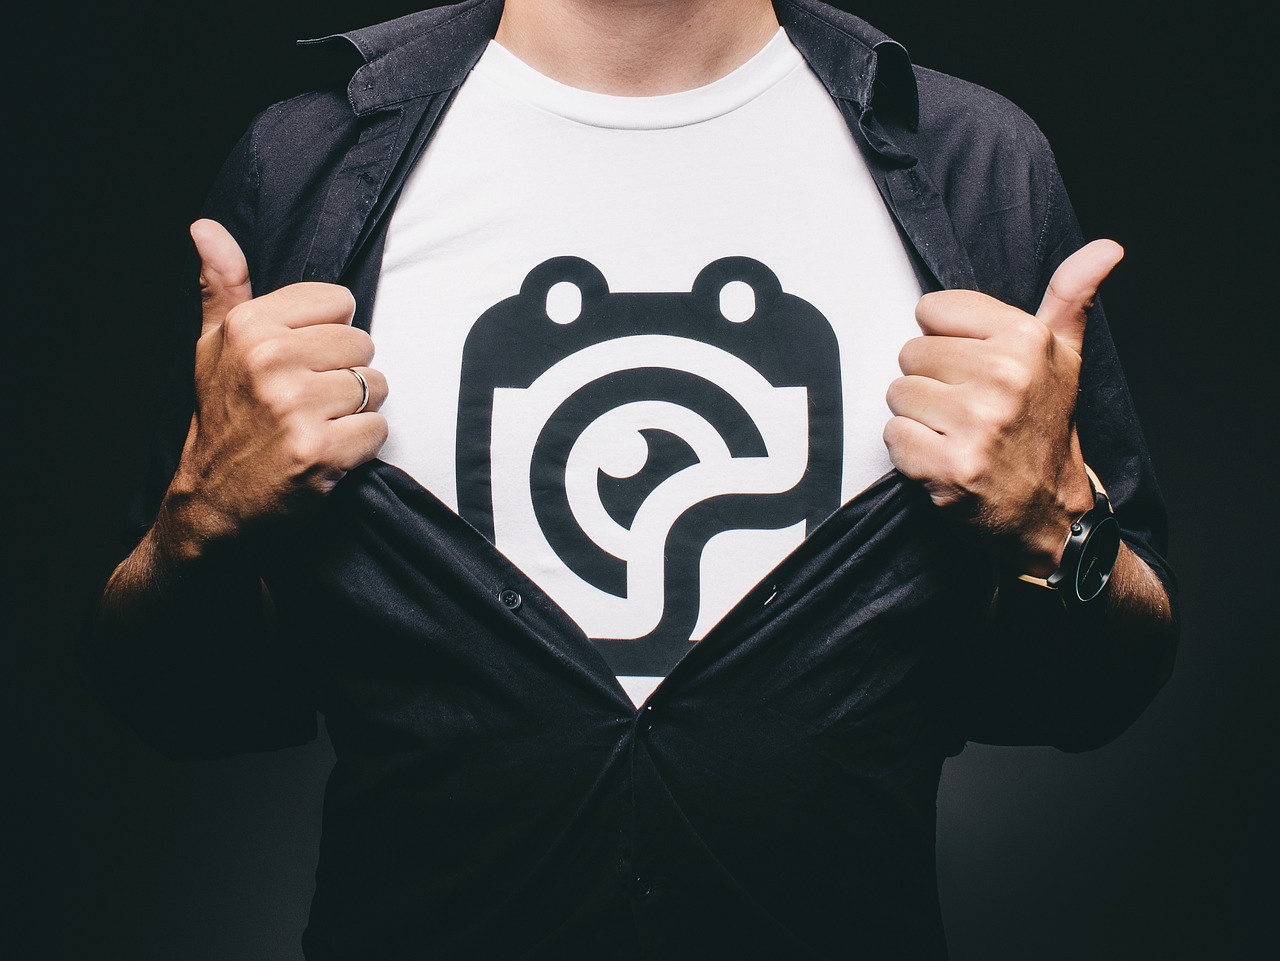 T-Shirt Design Ideas: Creative and Trendy Options for Your Next Project